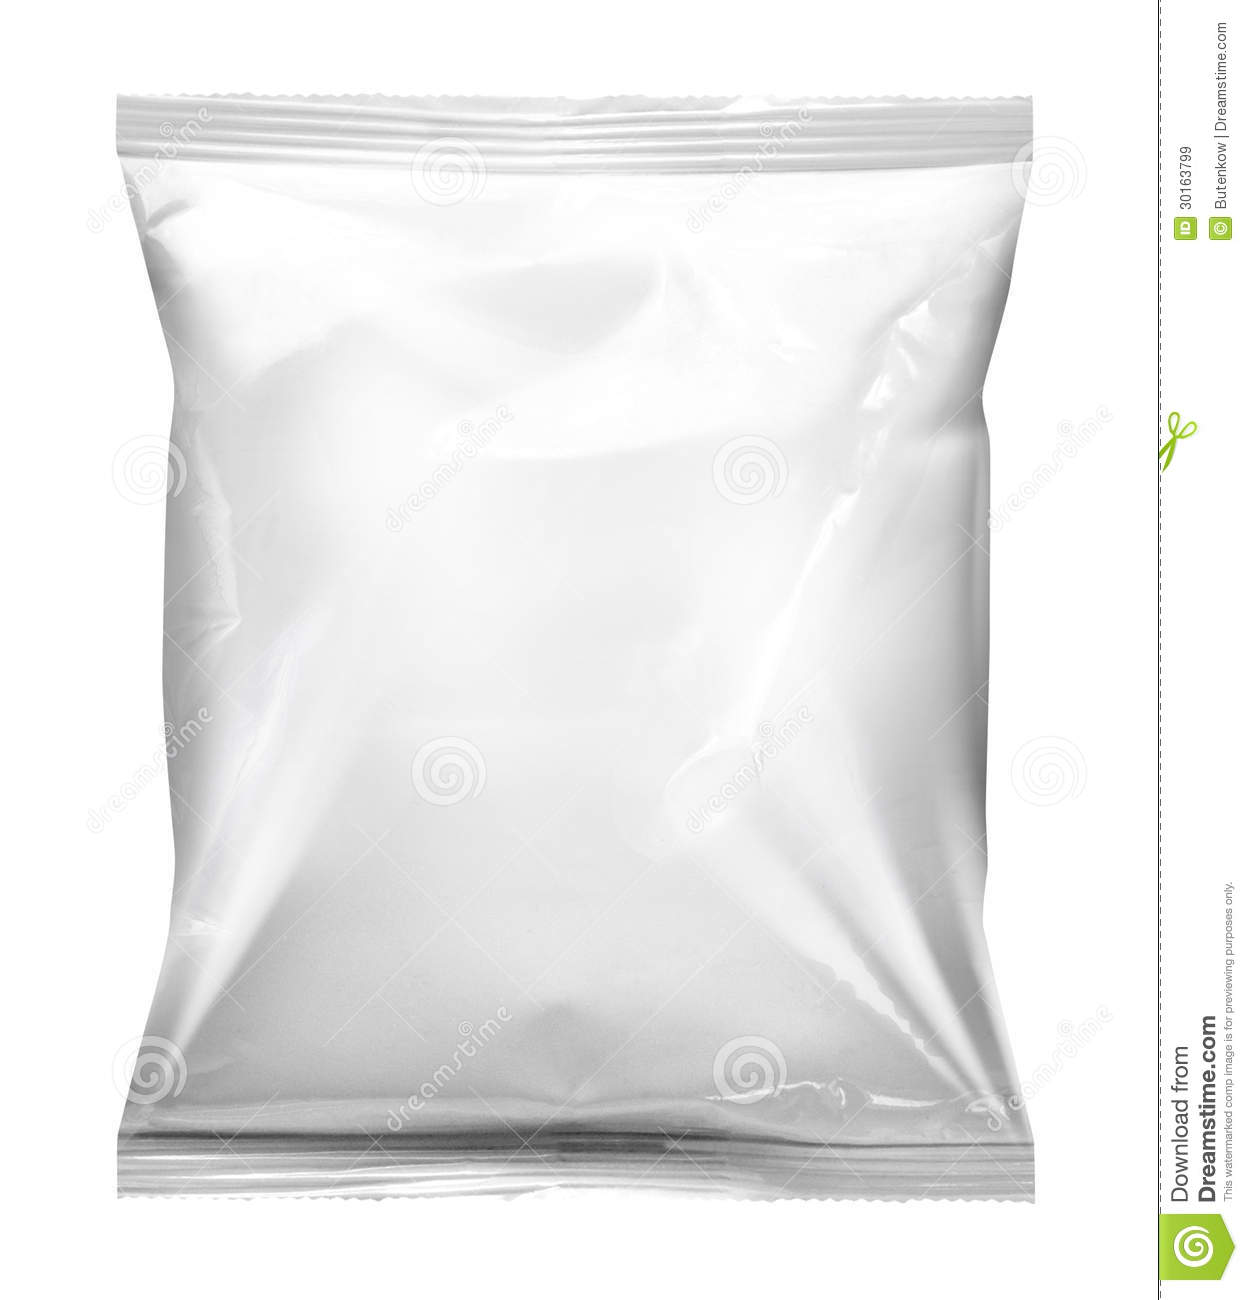 Plastic Food Bag Royalty Free Stock Images   Image  30163799